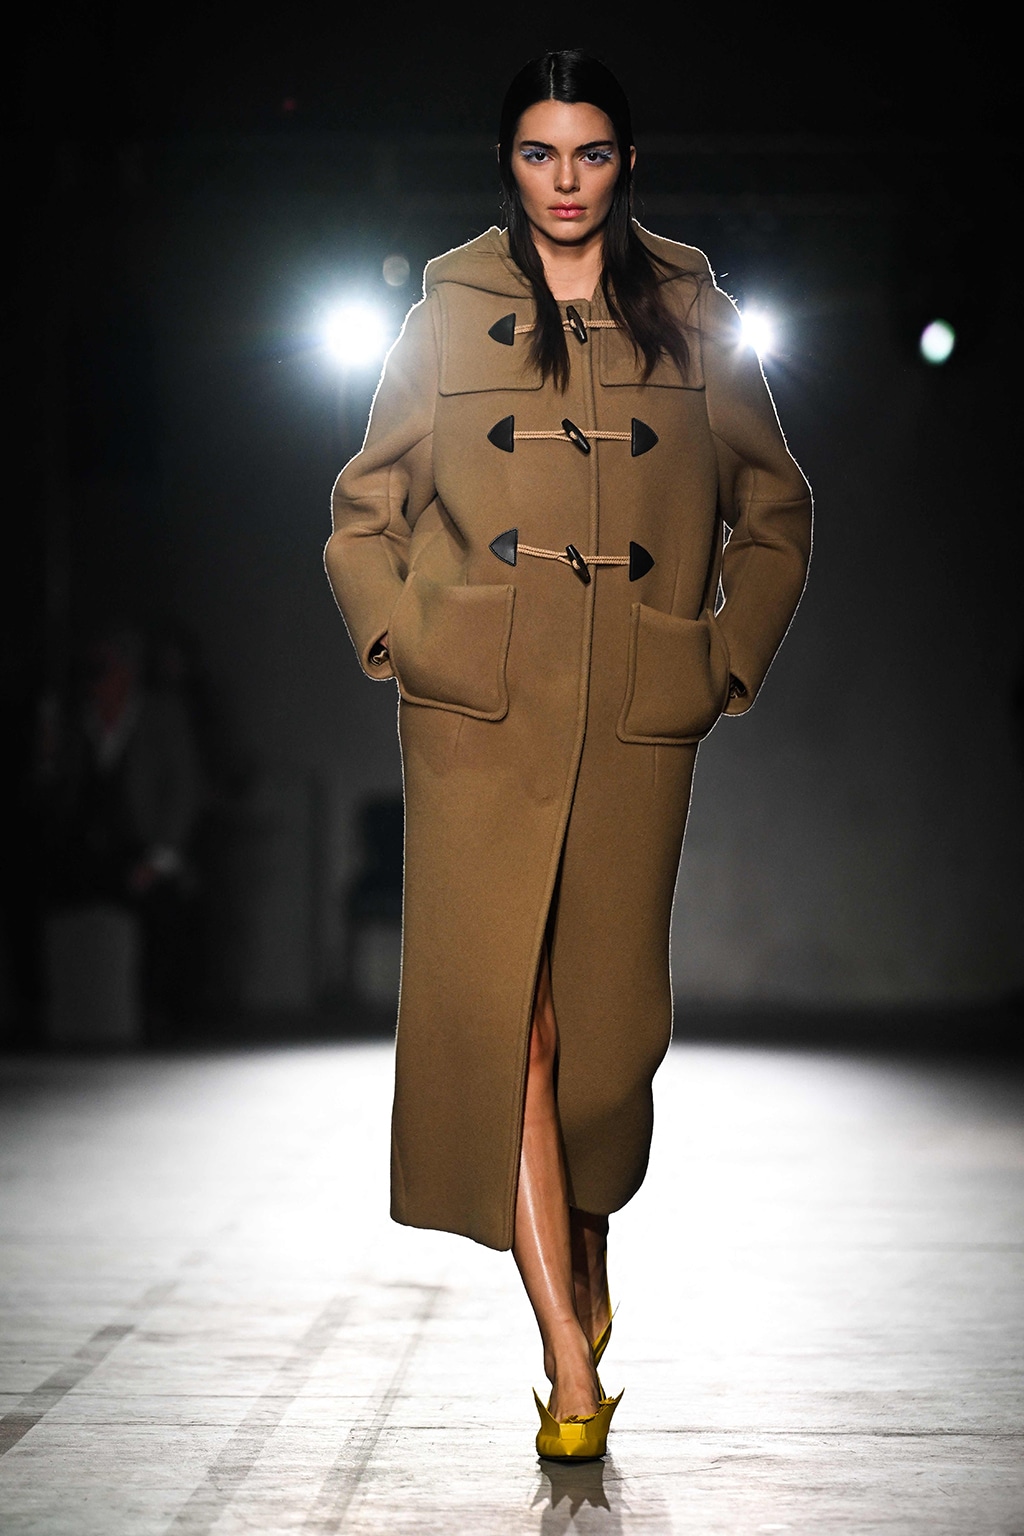 US model Kendall Jenner presents a creation for Prada